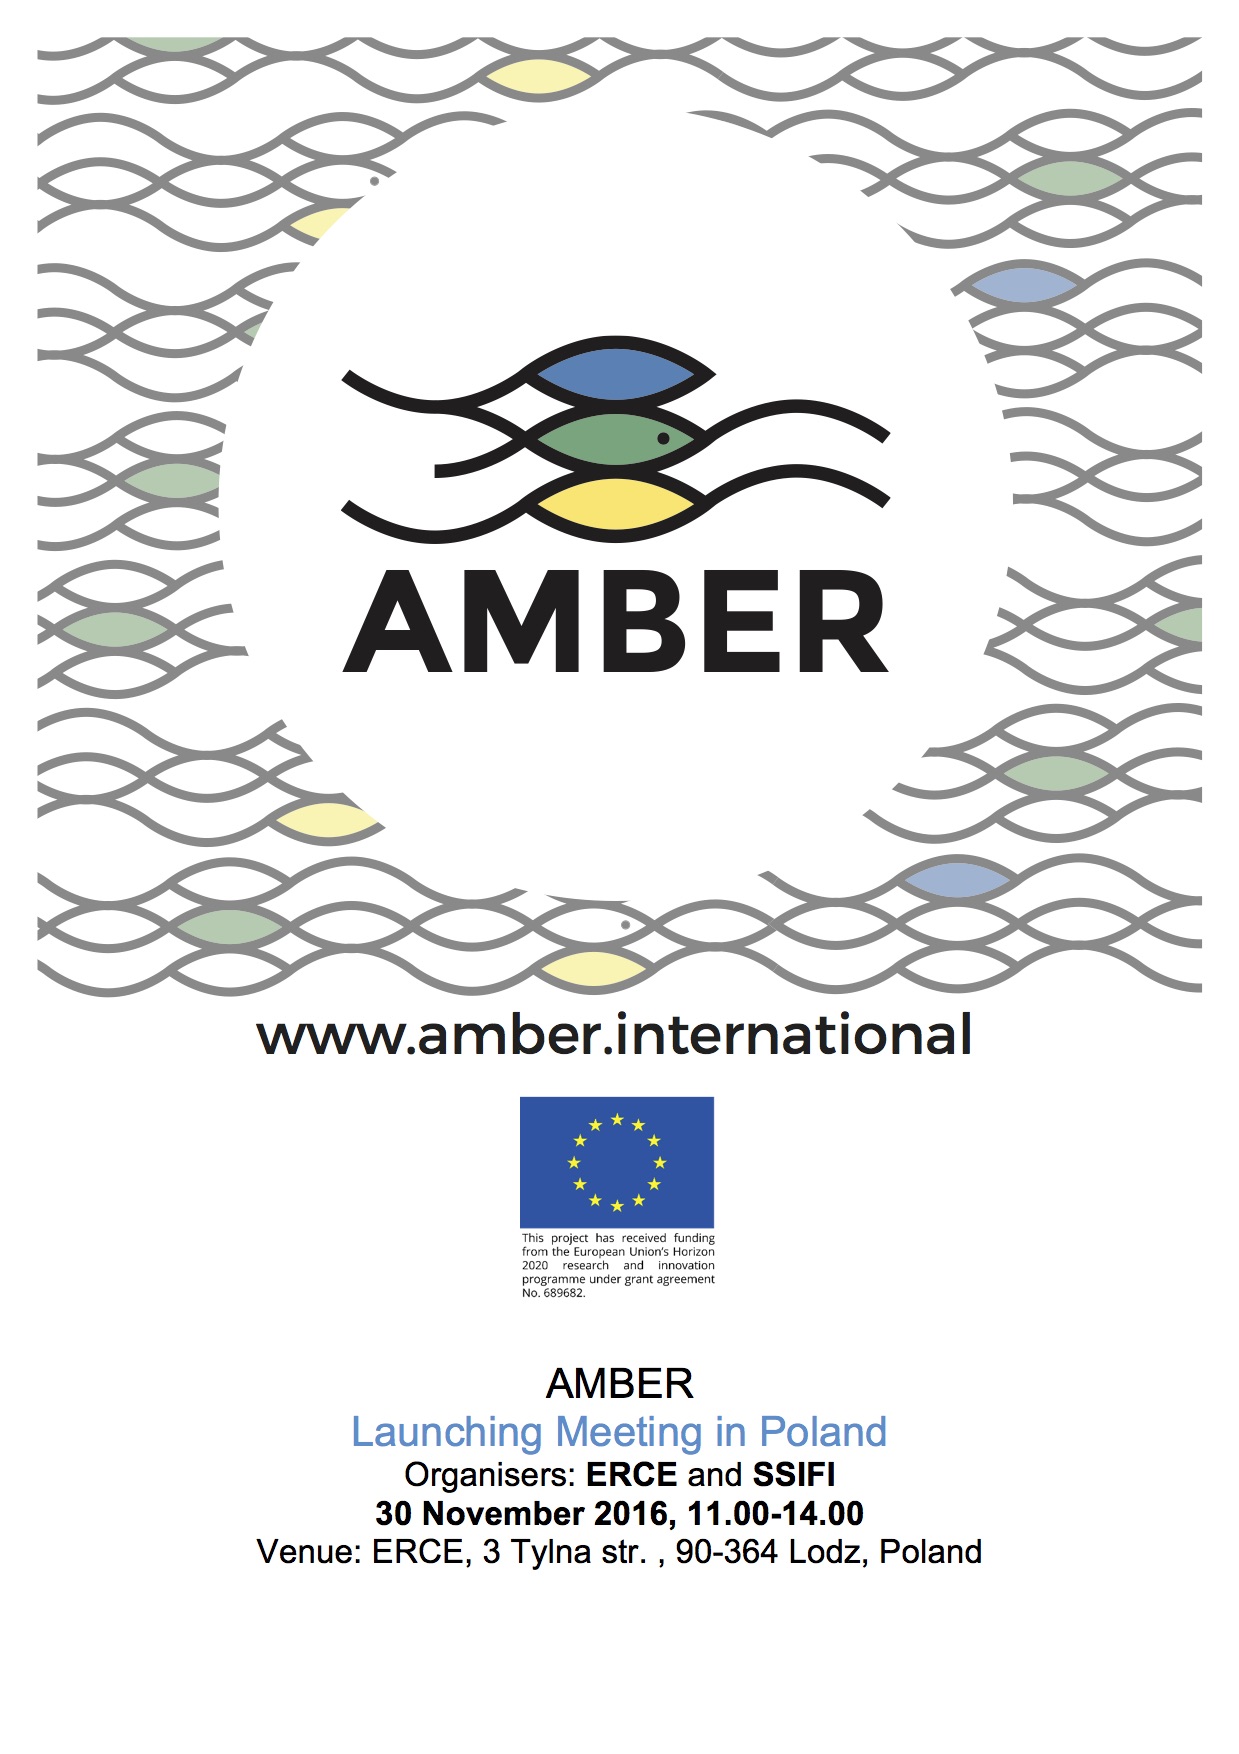 AMBER_Launching Meeting in Poland_on web